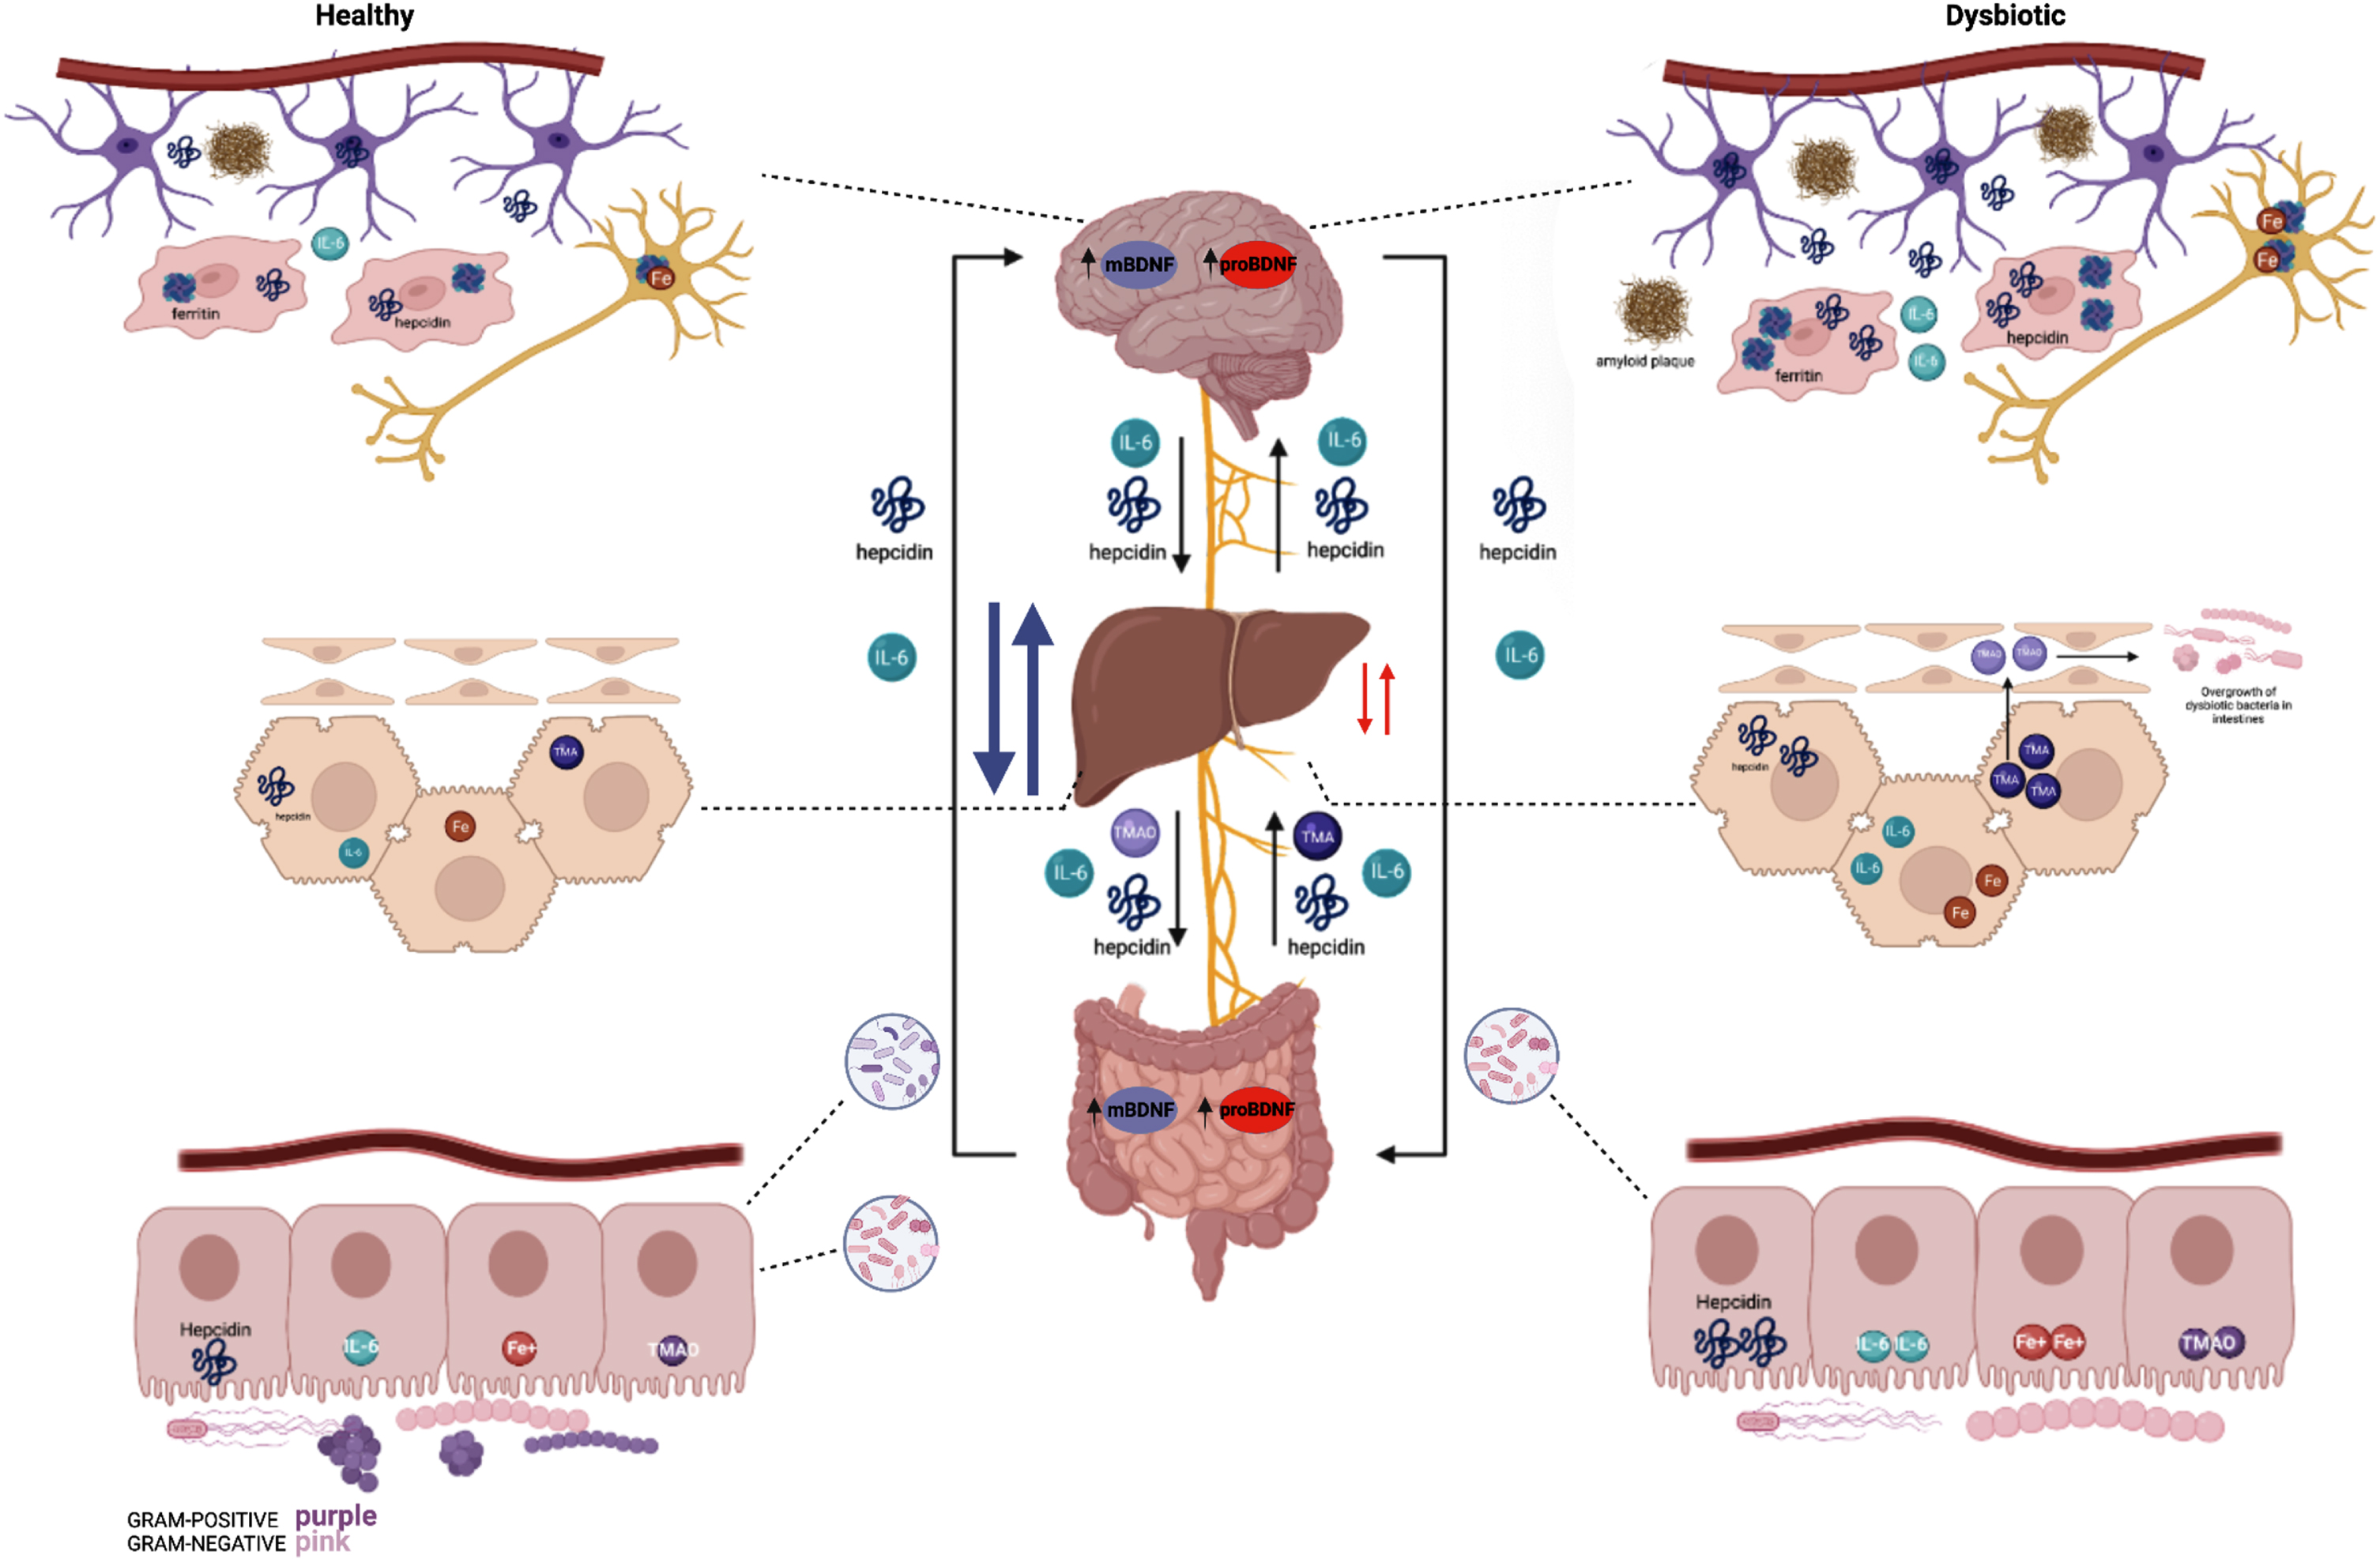 Summary of healthy (left) and dysbiotic (right) states of the gut-brain axis. The left region of the figure depicts the brain, liver, and gut at optimal health whereas the right region represents the brain, liver, and gut in dysbiotic states. The brain, in a state of a healthy microbiota, ferritin, hepcidin, IL-6, and iron are all at baseline levels. The liver in a healthy state contains baseline hepcidin, IL-6, and TMA levels which supports a balance of healthy and dysbiotic bacteria. Iron levels are slightly higher in the healthy state than a dysbiotic state as hepcidin is upregulated in a dysbiotic state. In addition, a healthy microbiota consists of a balance of Gram-positive and Gram-negative bacteria; in which hepcidin, iron (Fe3+), IL-6, and TMAO levels express a normal state of balance. The right region of the figure depicts the brain in a state of dysbiotic microbiota. The brain responds preventatively by upregulating ferritin and hepcidin levels, as well as IL-6. This is done via the astrocytes (purple) and microglia (red). In the neuron (dark yellow), iron is upregulated as well in the setting of neuroinflammation. Amyloid plaques can also be seen in the dysbiotic state as above. Below, the liver is illustrated in a state of dysbiosis. IL-6 is upregulated, and higher levels of TMA are sent to the liver to be oxidized to TMAO. TMAO is sent to the small intestines which ultimately causes inflammation and the overgrowth of dysbiotic bacteria. Most importantly, the dysbiotic microbiota indicates an increase of gram-negative bacteria and elevated hepcidin. Whereas a dysbiosis state indicates an increase of gram-negative bacteria and elevated hepcidin levels resulting in excessive iron accumulation. This stimulates high ferritin levels which promotes less cognitive decline and therefore excess hepcidin production. The synthesis of hepcidin is rapidly increased by infection and inflammation in which elevated IL-6 levels initiate a pro-inflammatory cascade. With IL-6 upregulation occurring in the liver, the higher levels of TMA become oxidized to TMAO. Circulation of TMAO initiated in the small intestine initiates an inflammatory state.